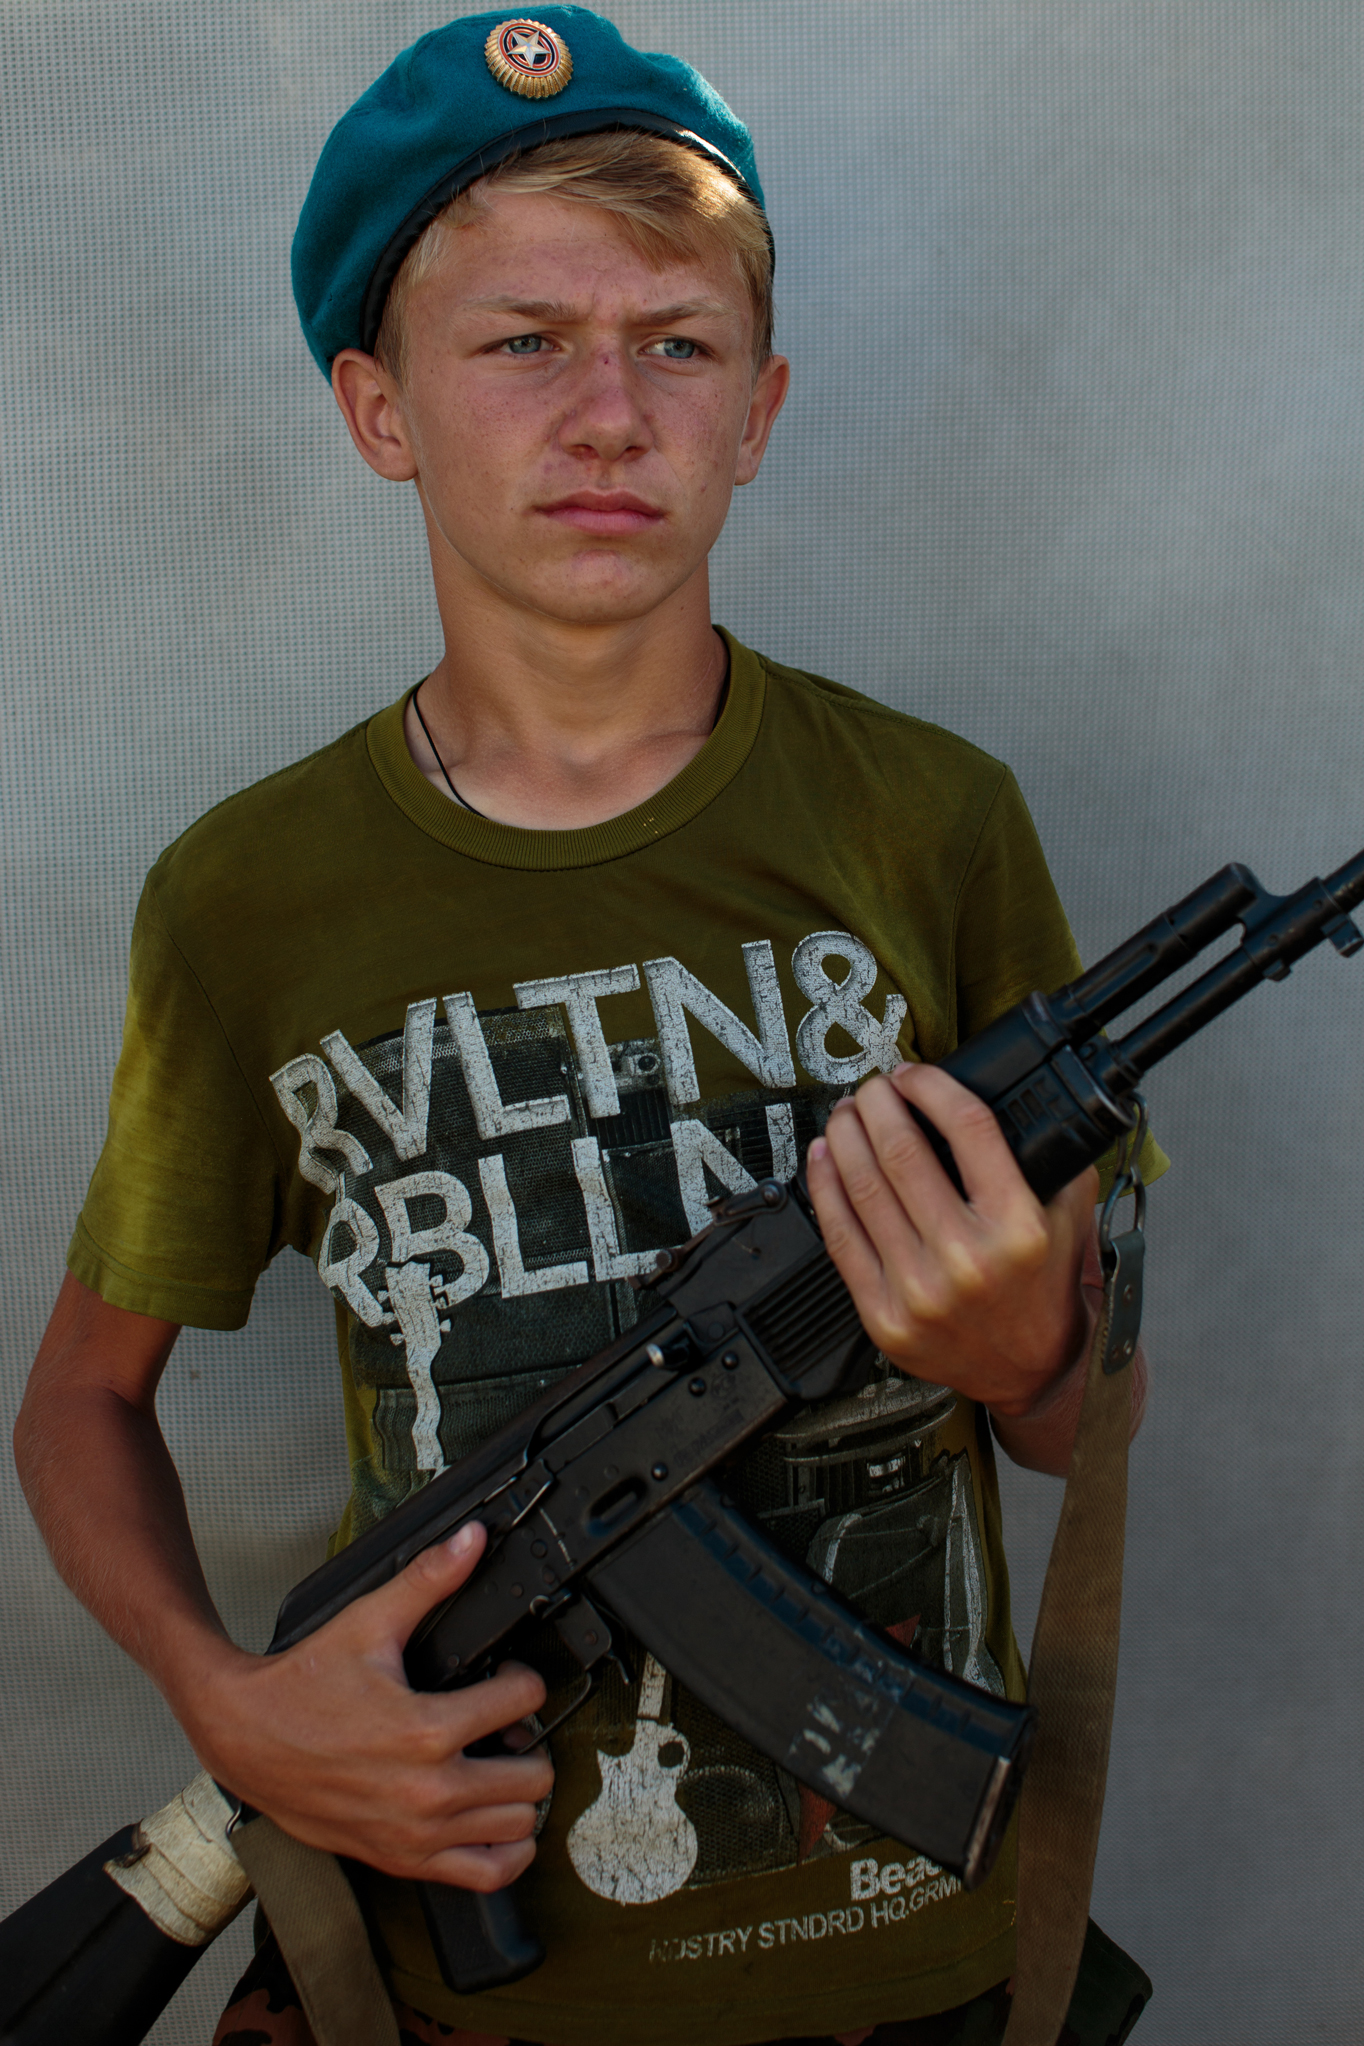 Vladimir Ribak, age 14, from Moscow poses with a real but non functional gun used solely for drills.